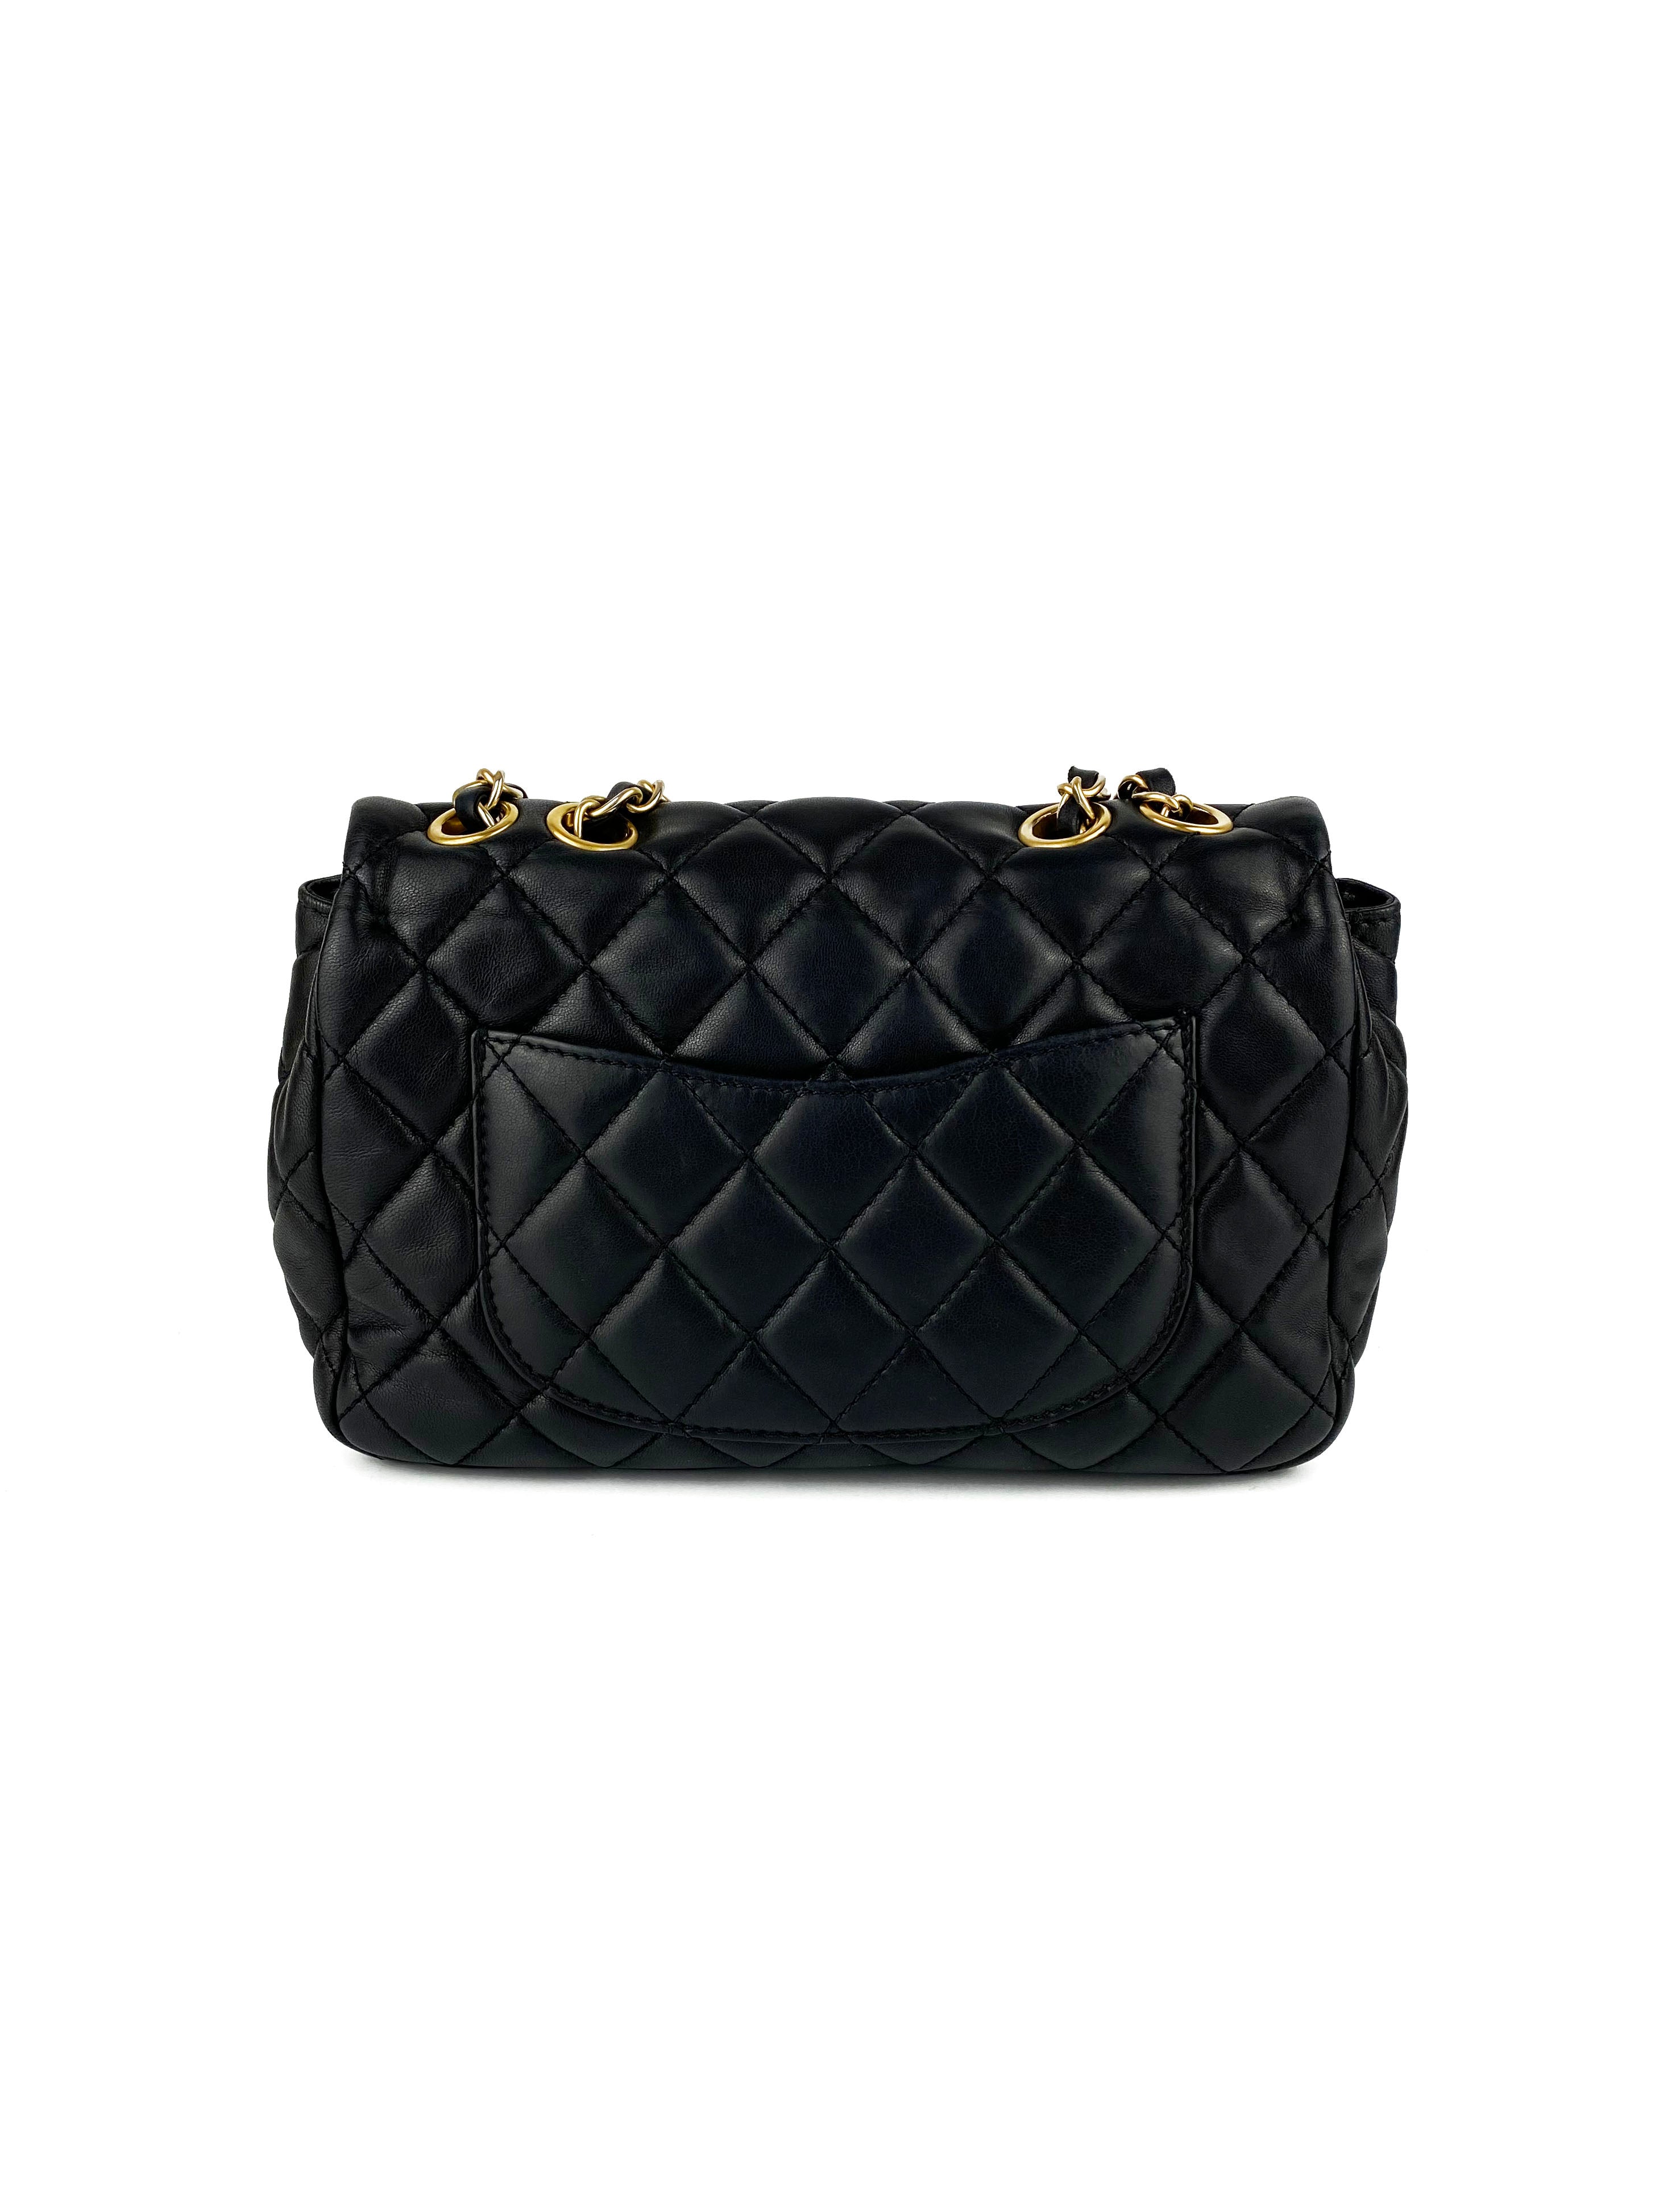 chanel-small-quilted-flap-bag-7.jpg